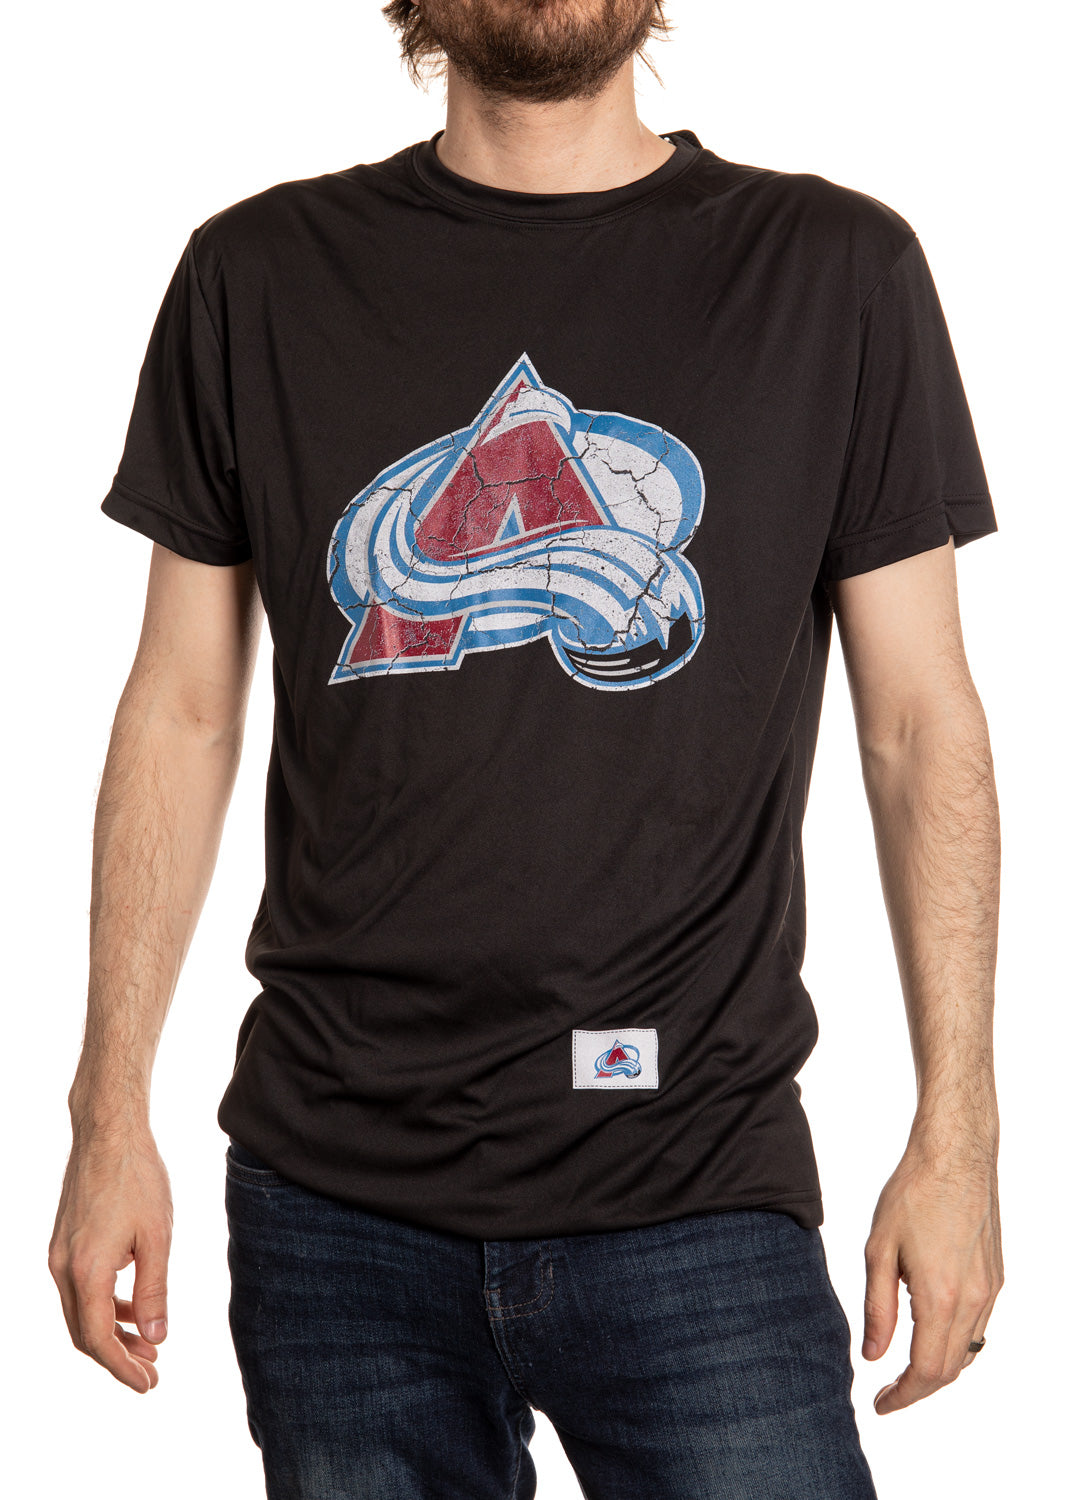 Colorado Avalanche Short Sleeve T-Shirt Front View